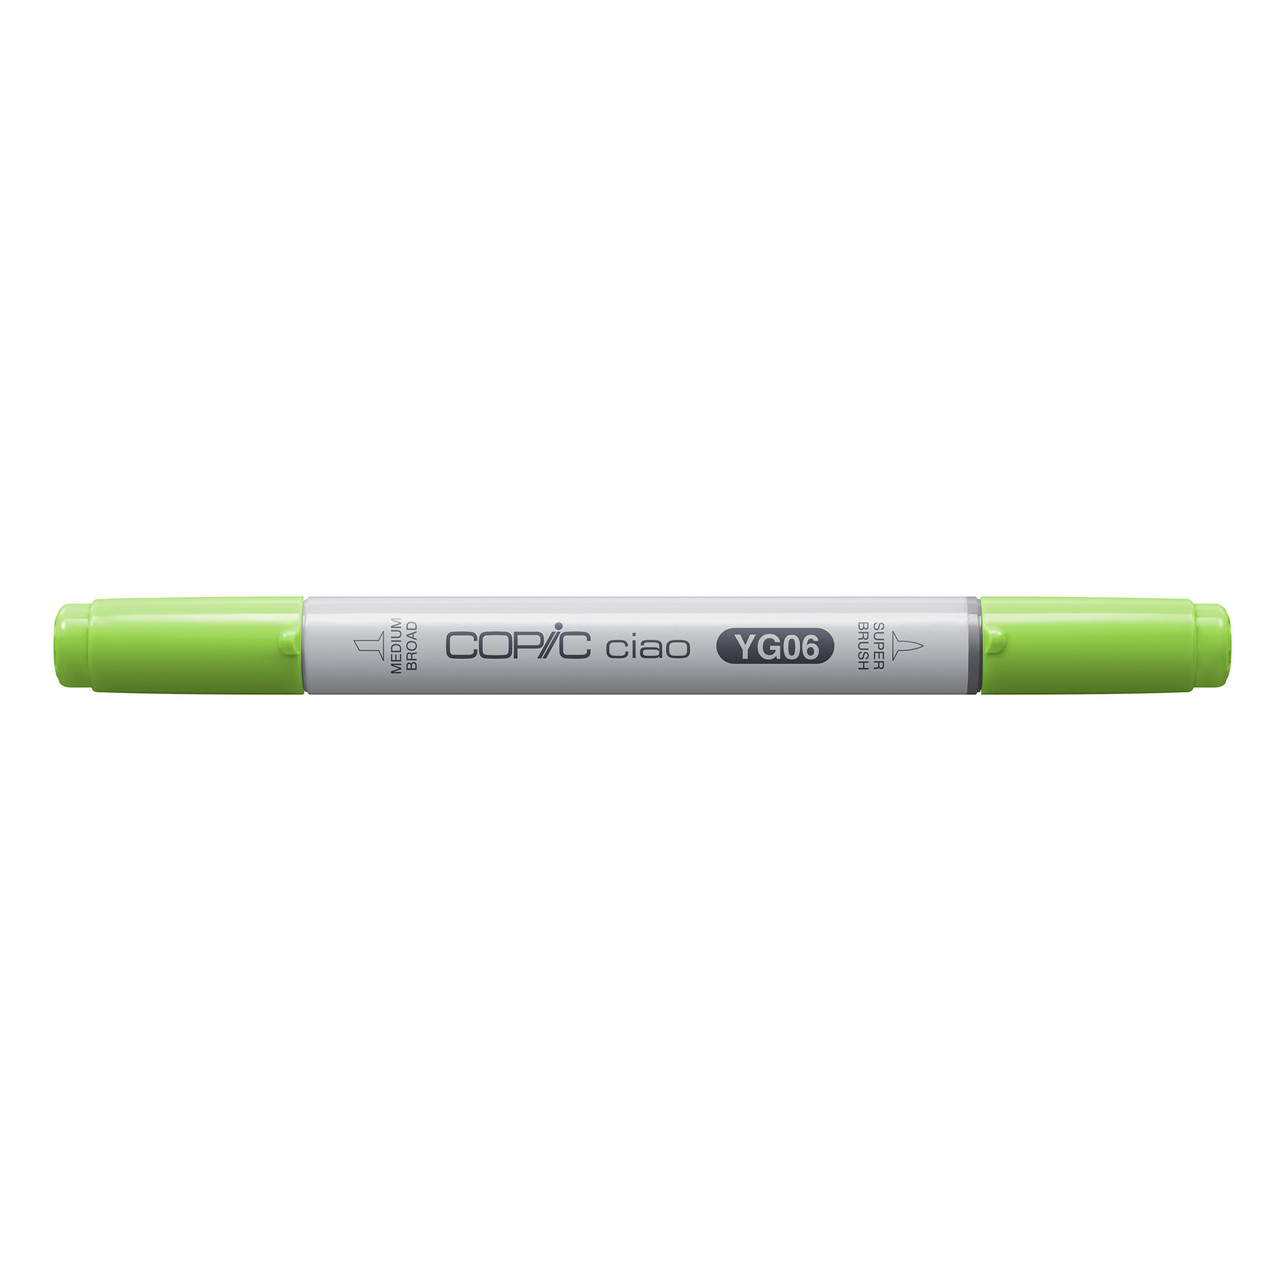 Copic Ciao Marker Yellowish Green YG06